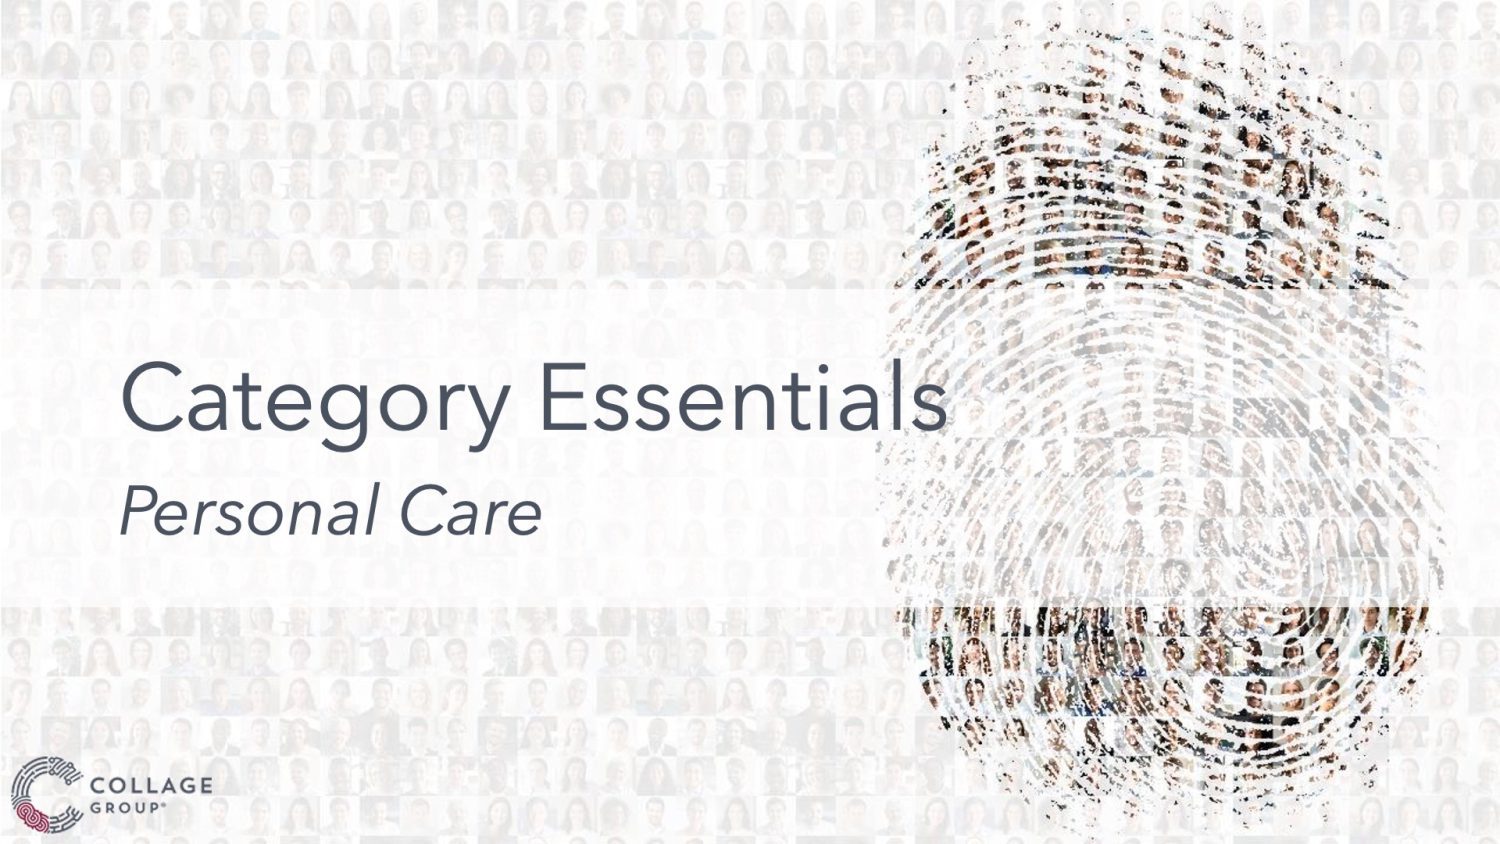 Category Essentials - Personal Care - cover image